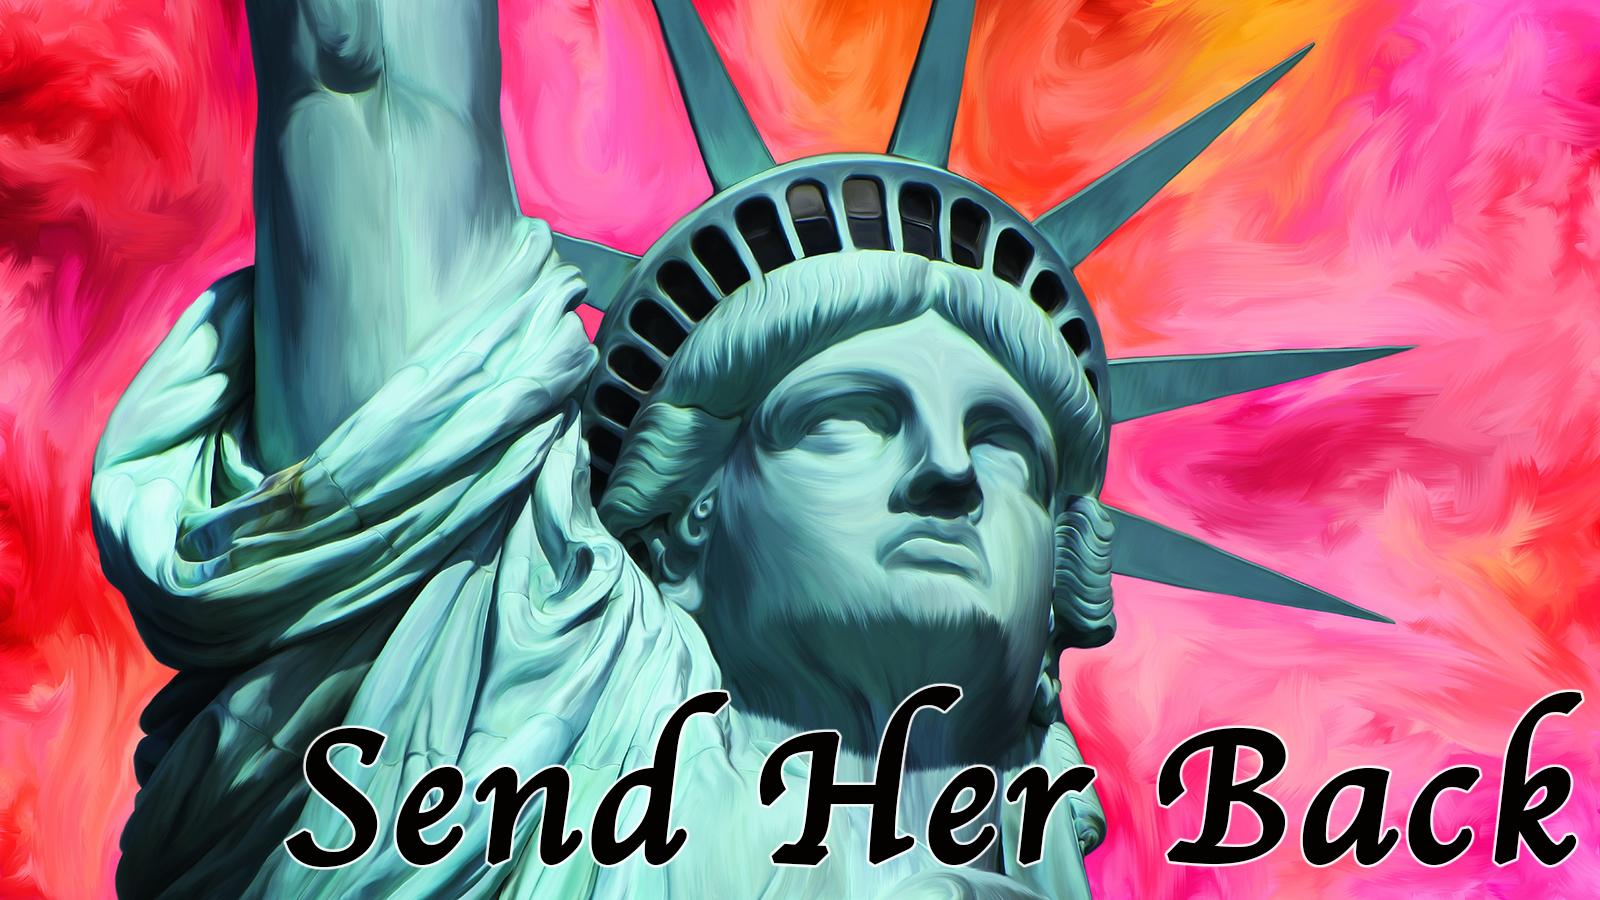 Send back the Statue of Liberty.